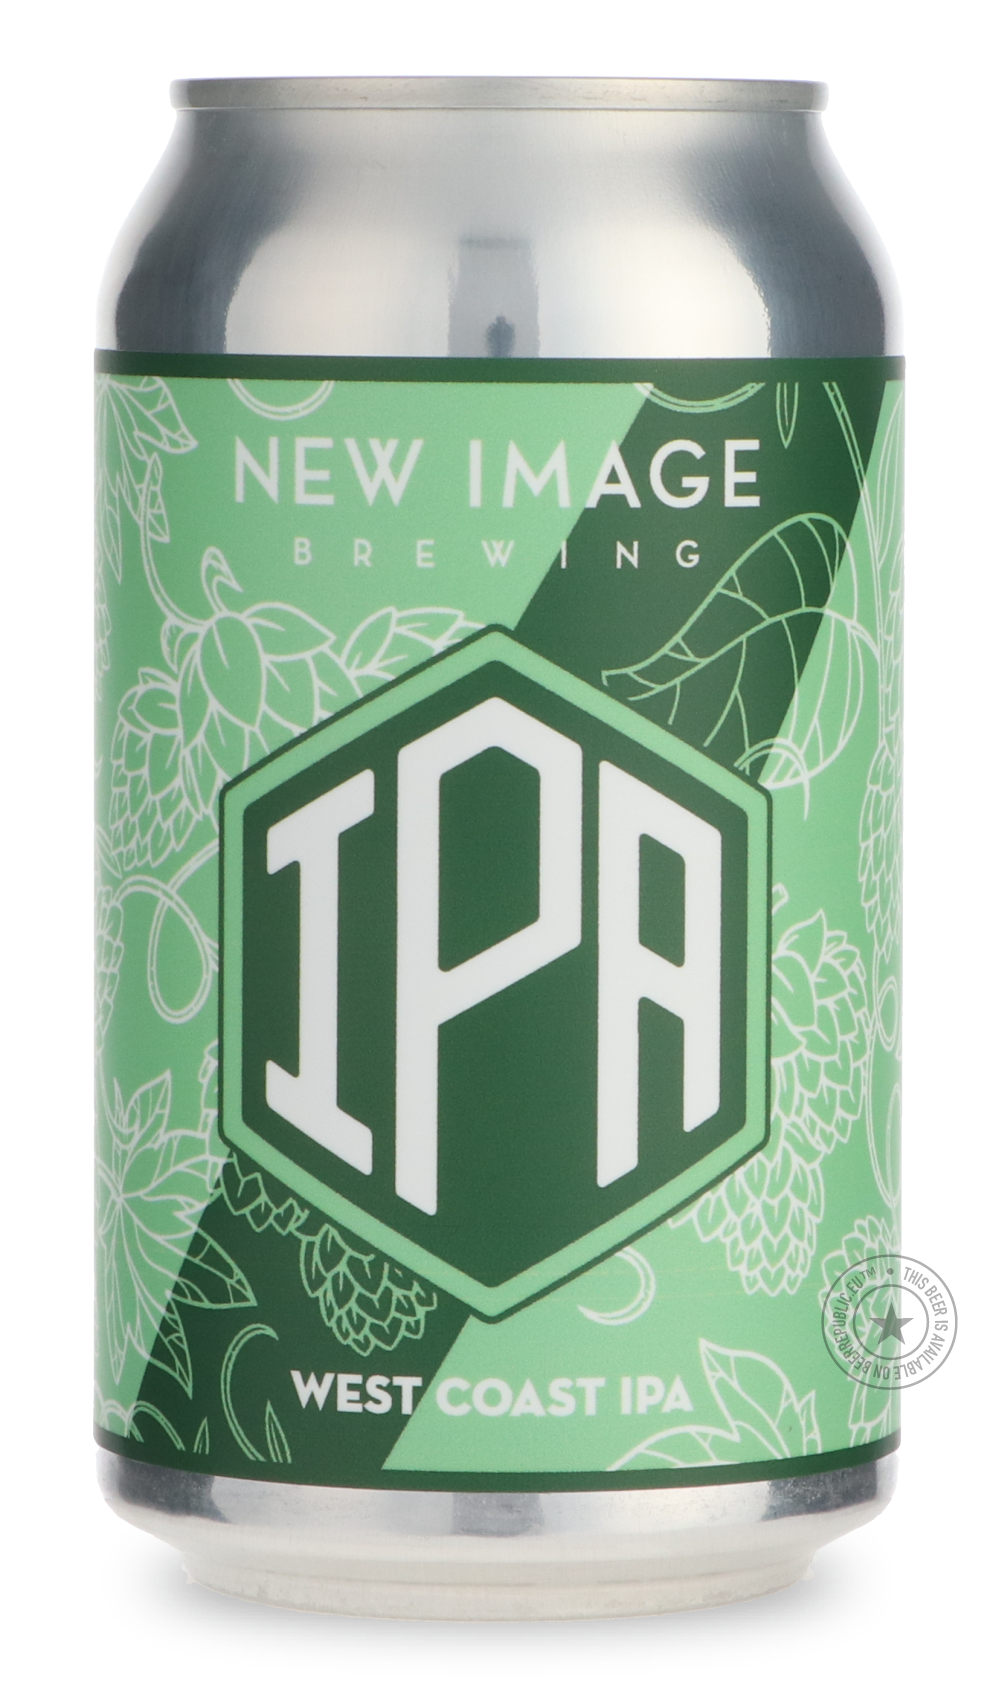 -New Image- IPA-IPA- Only @ Beer Republic - The best online beer store for American & Canadian craft beer - Buy beer online from the USA and Canada - Bier online kopen - Amerikaans bier kopen - Craft beer store - Craft beer kopen - Amerikanisch bier kaufen - Bier online kaufen - Acheter biere online - IPA - Stout - Porter - New England IPA - Hazy IPA - Imperial Stout - Barrel Aged - Barrel Aged Imperial Stout - Brown - Dark beer - Blond - Blonde - Pilsner - Lager - Wheat - Weizen - Amber - Barley Wine - Qua